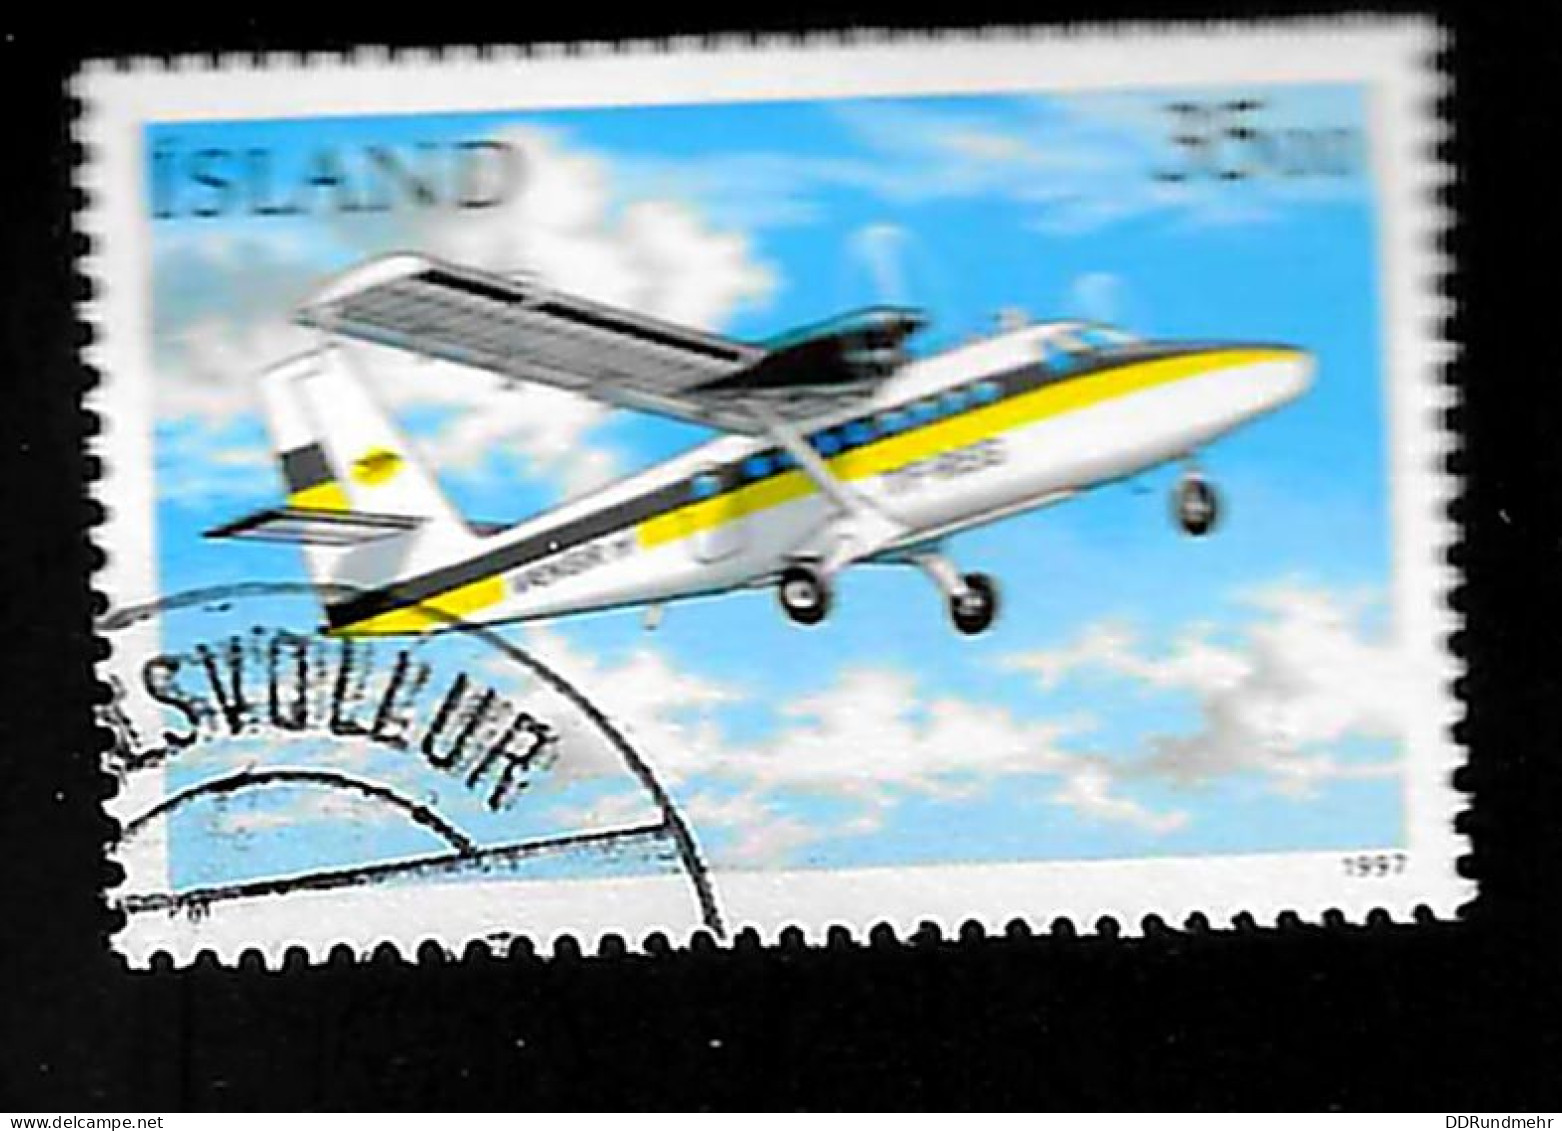 1997 Postal Aircrafts Michel IS 869 Stamp Number IS 841 Stanley Gibbons IS 882 AFA IS 854 Used - Usati